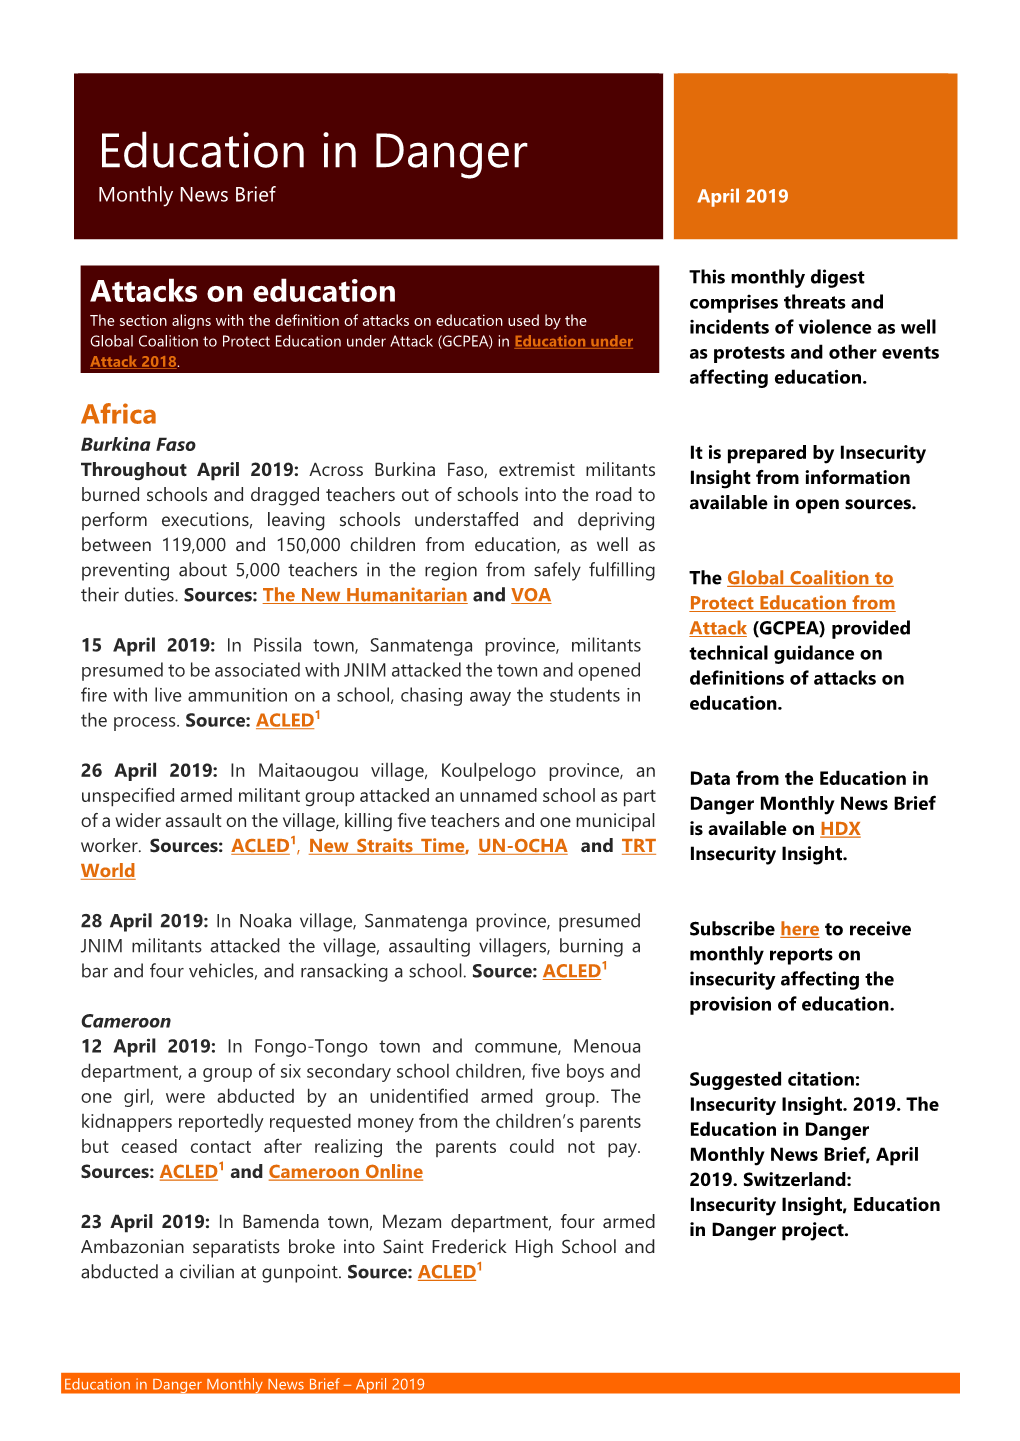 Education in Danger Monthly News Brief April 2019